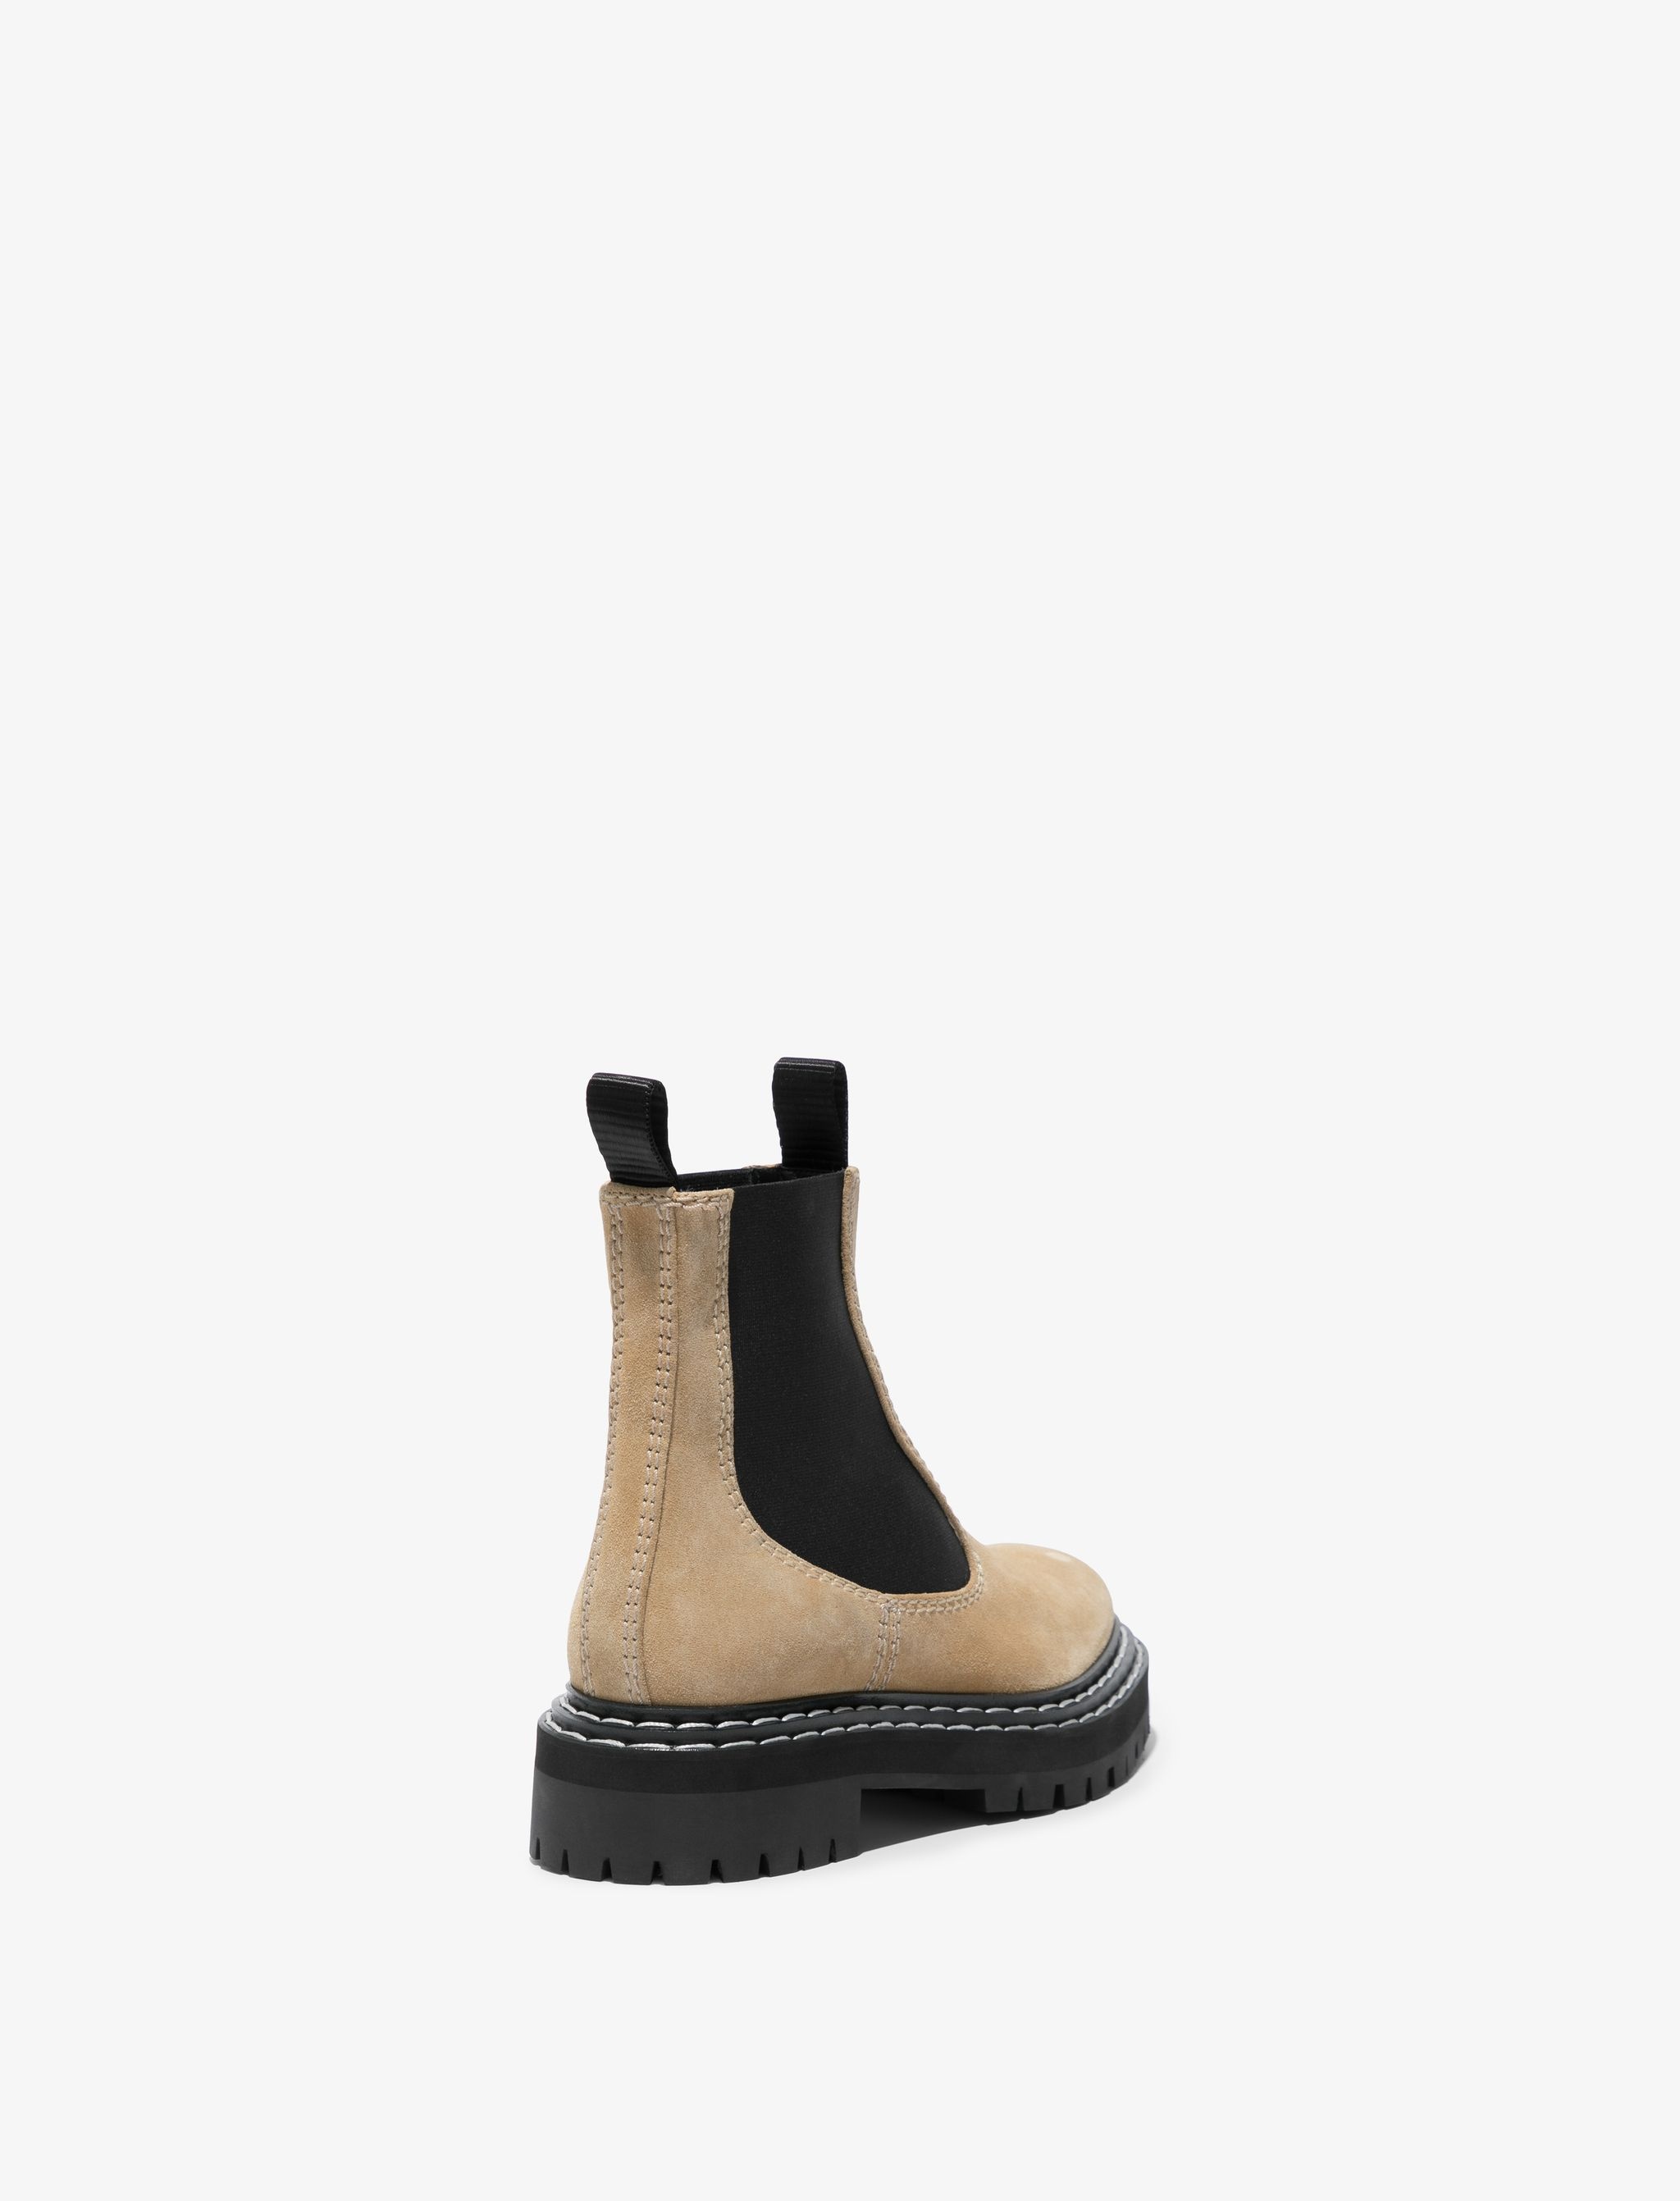 Suede Lug Sole Chelsea Boots - 3